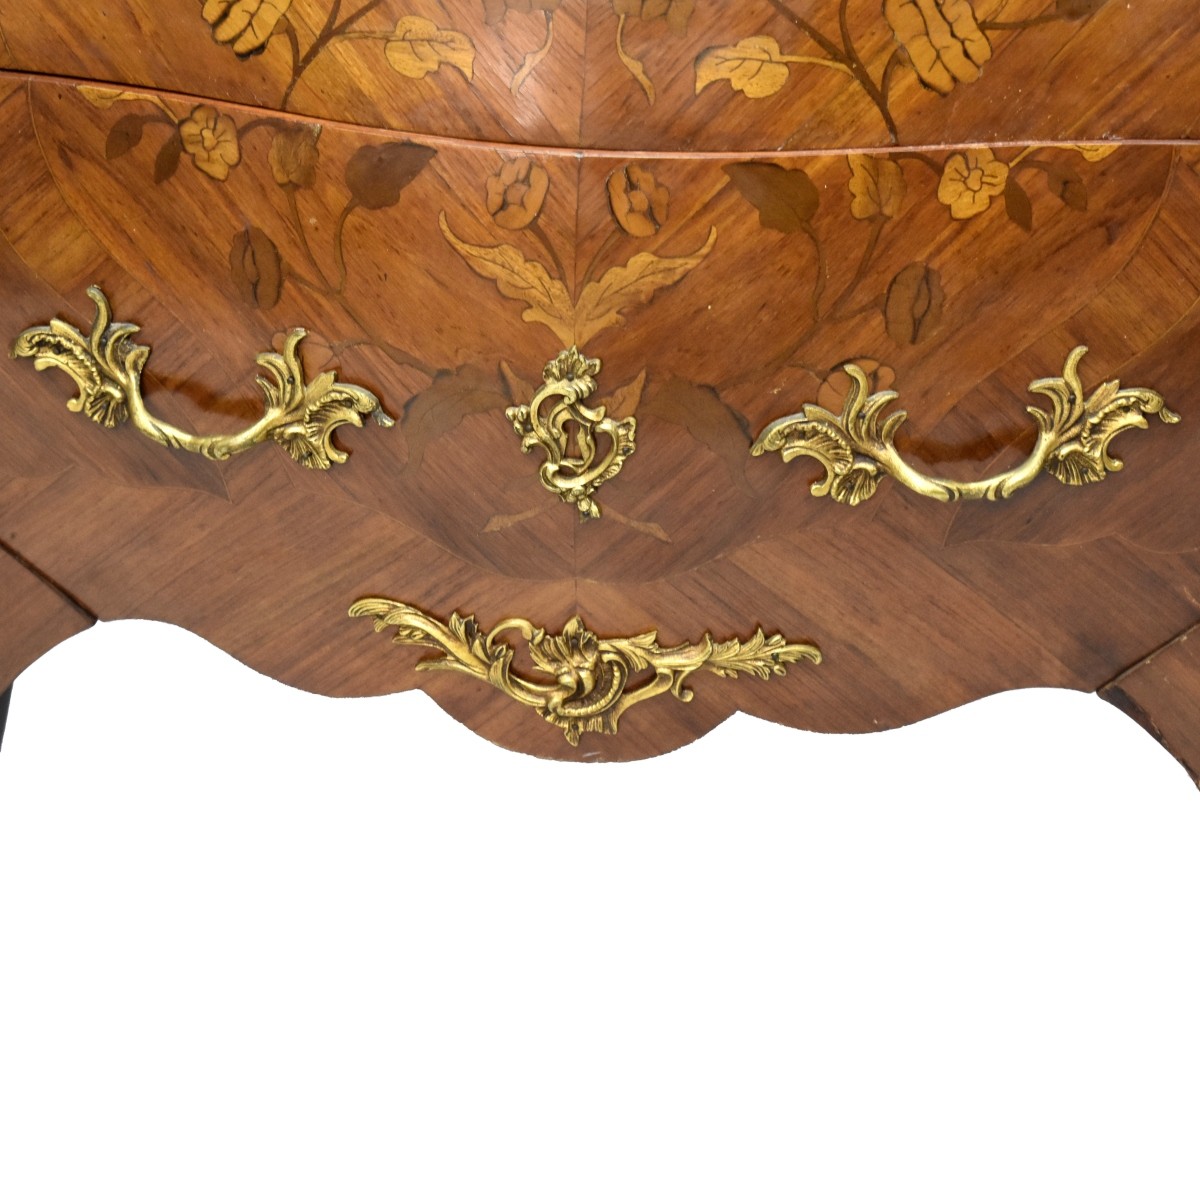 Mid 20th C. Louis XVI Style Commode